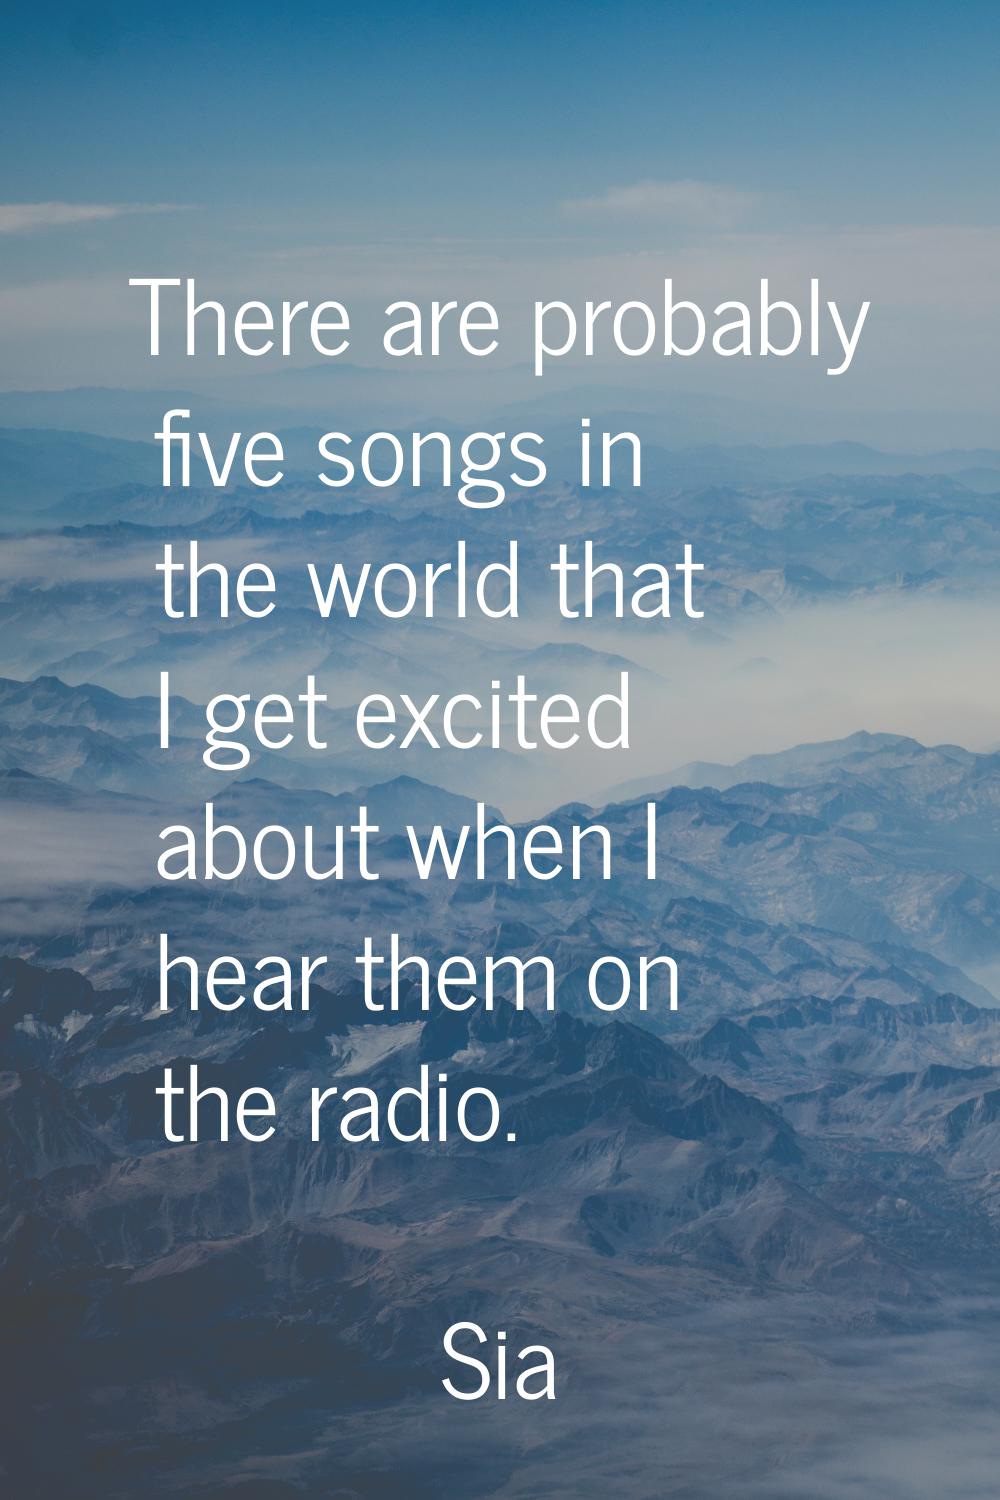 There are probably five songs in the world that I get excited about when I hear them on the radio.